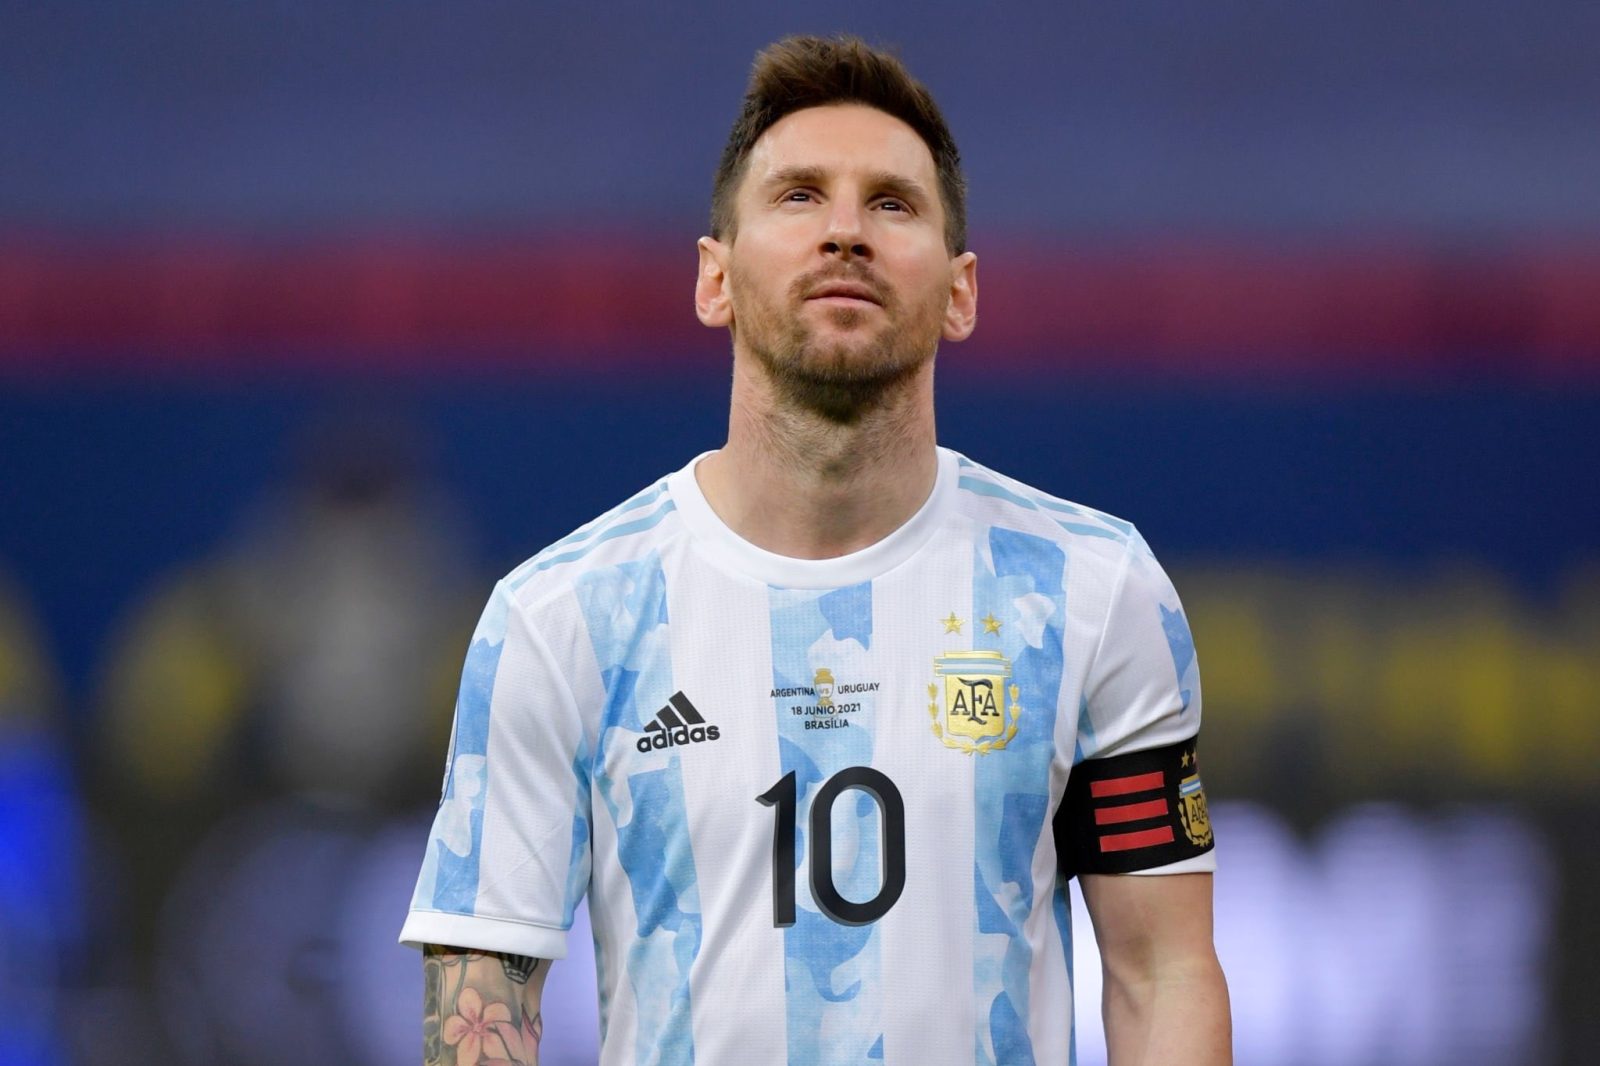 Messi talks about injuries